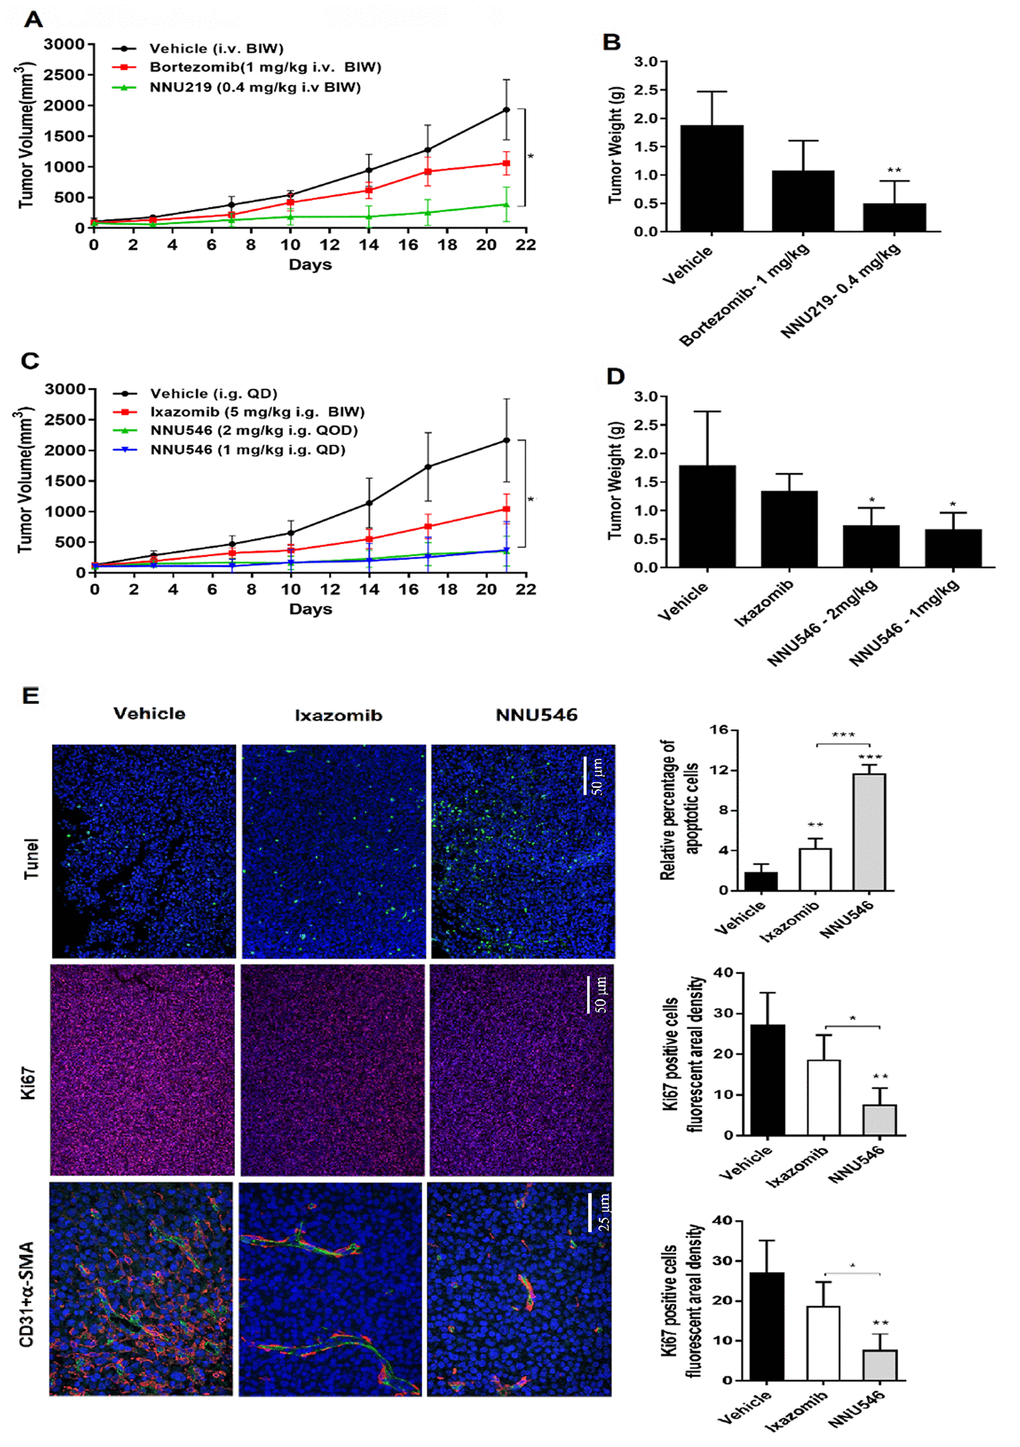 Effects of NNU219, NNU546, bortezomib and ixazomib on the growth of ARH77 xenograft model established in nude mice. (A) 5×106 of ARH77 cells were subcutaneously inoculated into the right flank of nude mice. When the mean tumor volume reached 100-150 mm3, mice were randomized into vehicle group (1% DMSO and 5% HPβCD) and treatment group (bortezomib, 1 mg/kg or NNU219, 0.4 mg/kg), intravenously administered twice weekly for 3 weeks. The measurement was performed using a caliper. Data were presented as mean tumor volume ± SD (n=5; *, p B) Average tumor weight of mice in the vehicle and treatment groups. Data were showed as mean ± SD (**, p C) Tumor-bearing mice were orally treated with vehicle, ixazomib (5 mg/kg, BIW) or NNU546 (1 mg/kg, QD or 2 mg/kg, QOD) schedule for 3 weeks. Data were presented as mean tumor volume ± SD (n=5; *, p p E) Left, tumor sections of untreated, Ixazomib or NNU546 treated mice were subjected to immunostaining for apoptosis (TUNEL, green color), proliferation marker Ki-67 (red color) and angiogenesis markers CD31 (green color) and α-SMA (red color) and detected using confocal microscopy (PerkinElmer UltraVIEW Vox, magnification, ×200 or ×400, nine continual fields put together). Right, the tissue sections were screened under a low-power field, and five fields were selected. Each field was analyzed separately to obtain the fraction of apoptotic cells, ki67 positive cells fluorescent areal density and microvessel density. The data is presented as mean ± SD across the vision fields (*, p p p 